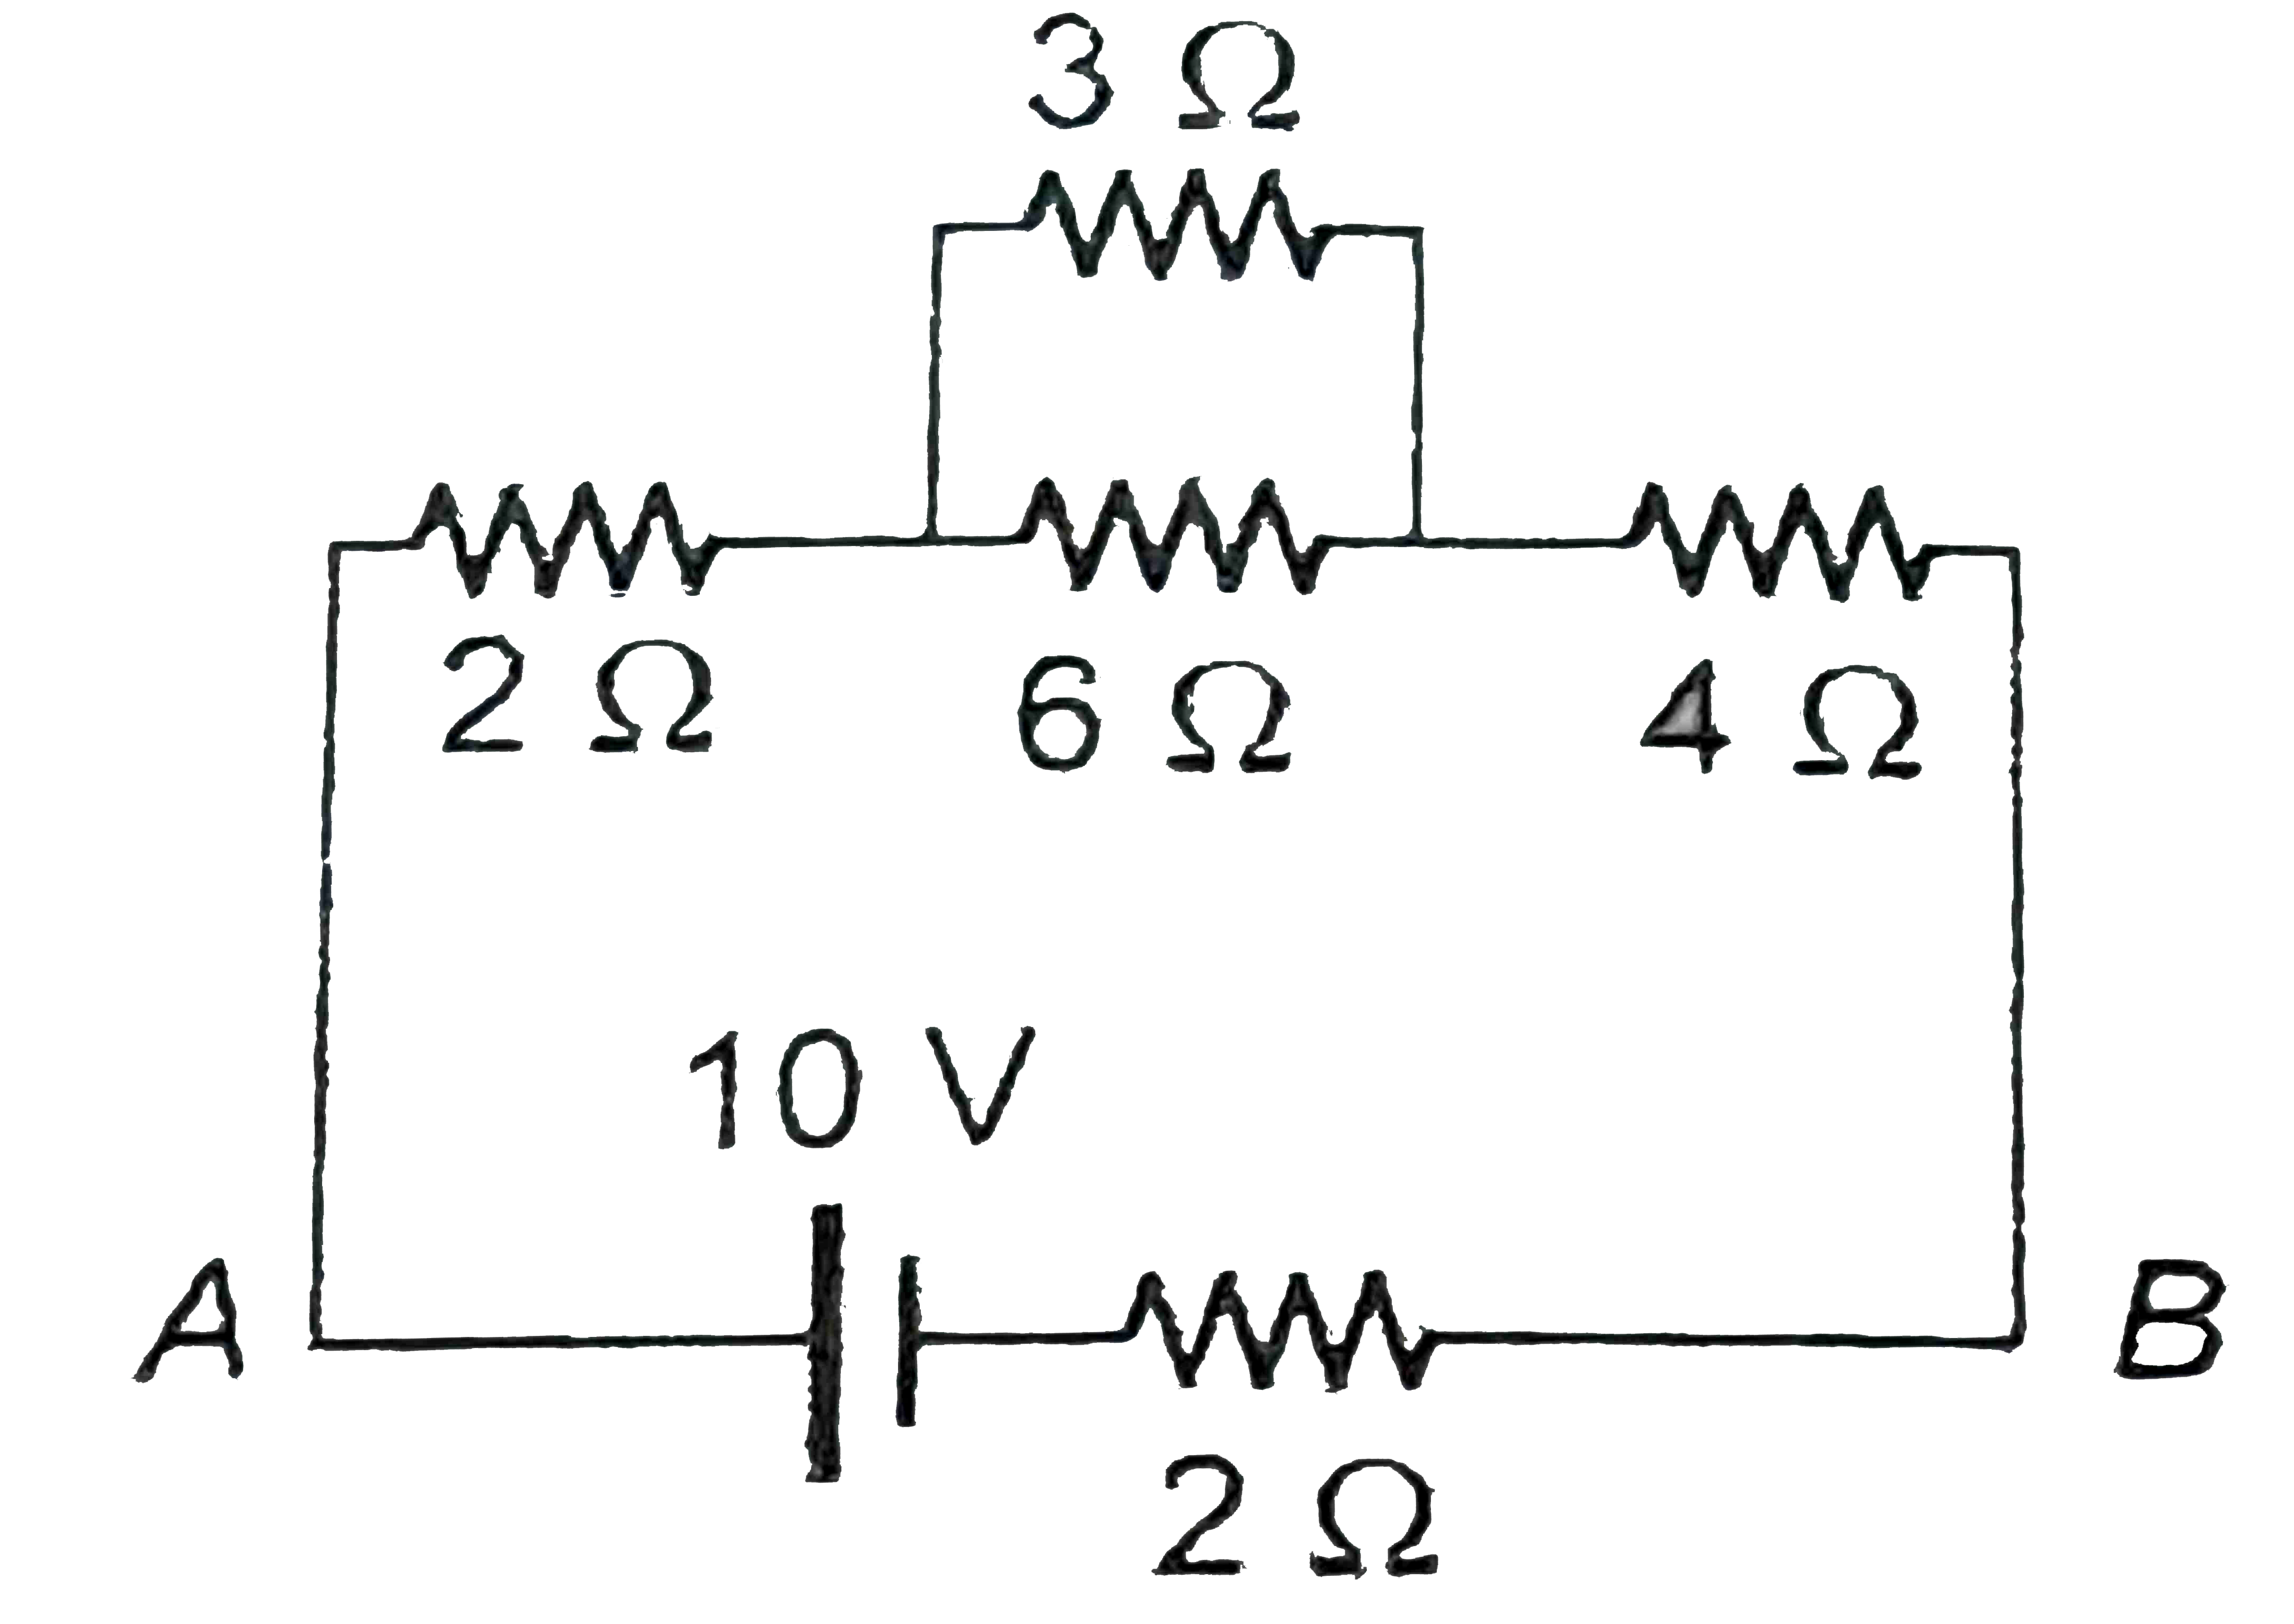 (a) Find the potential difference between A and B      (b) Calculate the current flowing in the circuit and the potential difference across terminals of each cell.      ( c) Calculate the potential difference across terminals of each cell.      (d) Calculate the potential difference between A and B      ( e) Calculate the current in each resistor and terminal potential difference across each cell.      (f) Calculate potential difference across each cell.      (g) A battery of 6 cells each of emf 2 V and internal resistance 0.5 Omega is being changed by DC mains of emf 220 V by using an external resistance of 10 Omega. Calculate.   (i) the charging current   (ii) the potential difference across the battery.   .